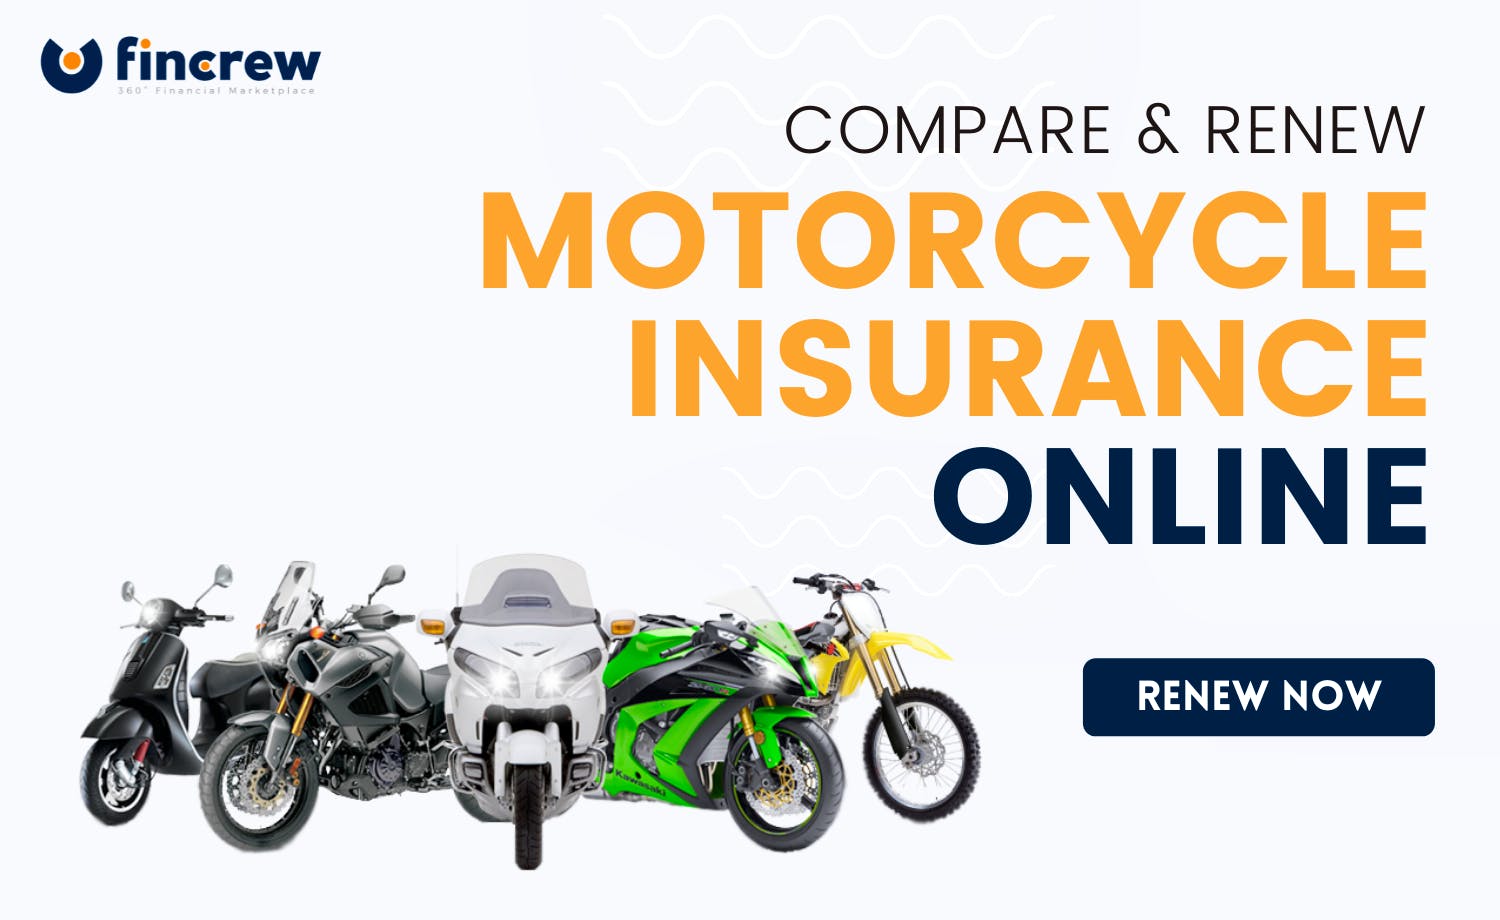 Compare & Renew Your Motorcycle Insurance Online